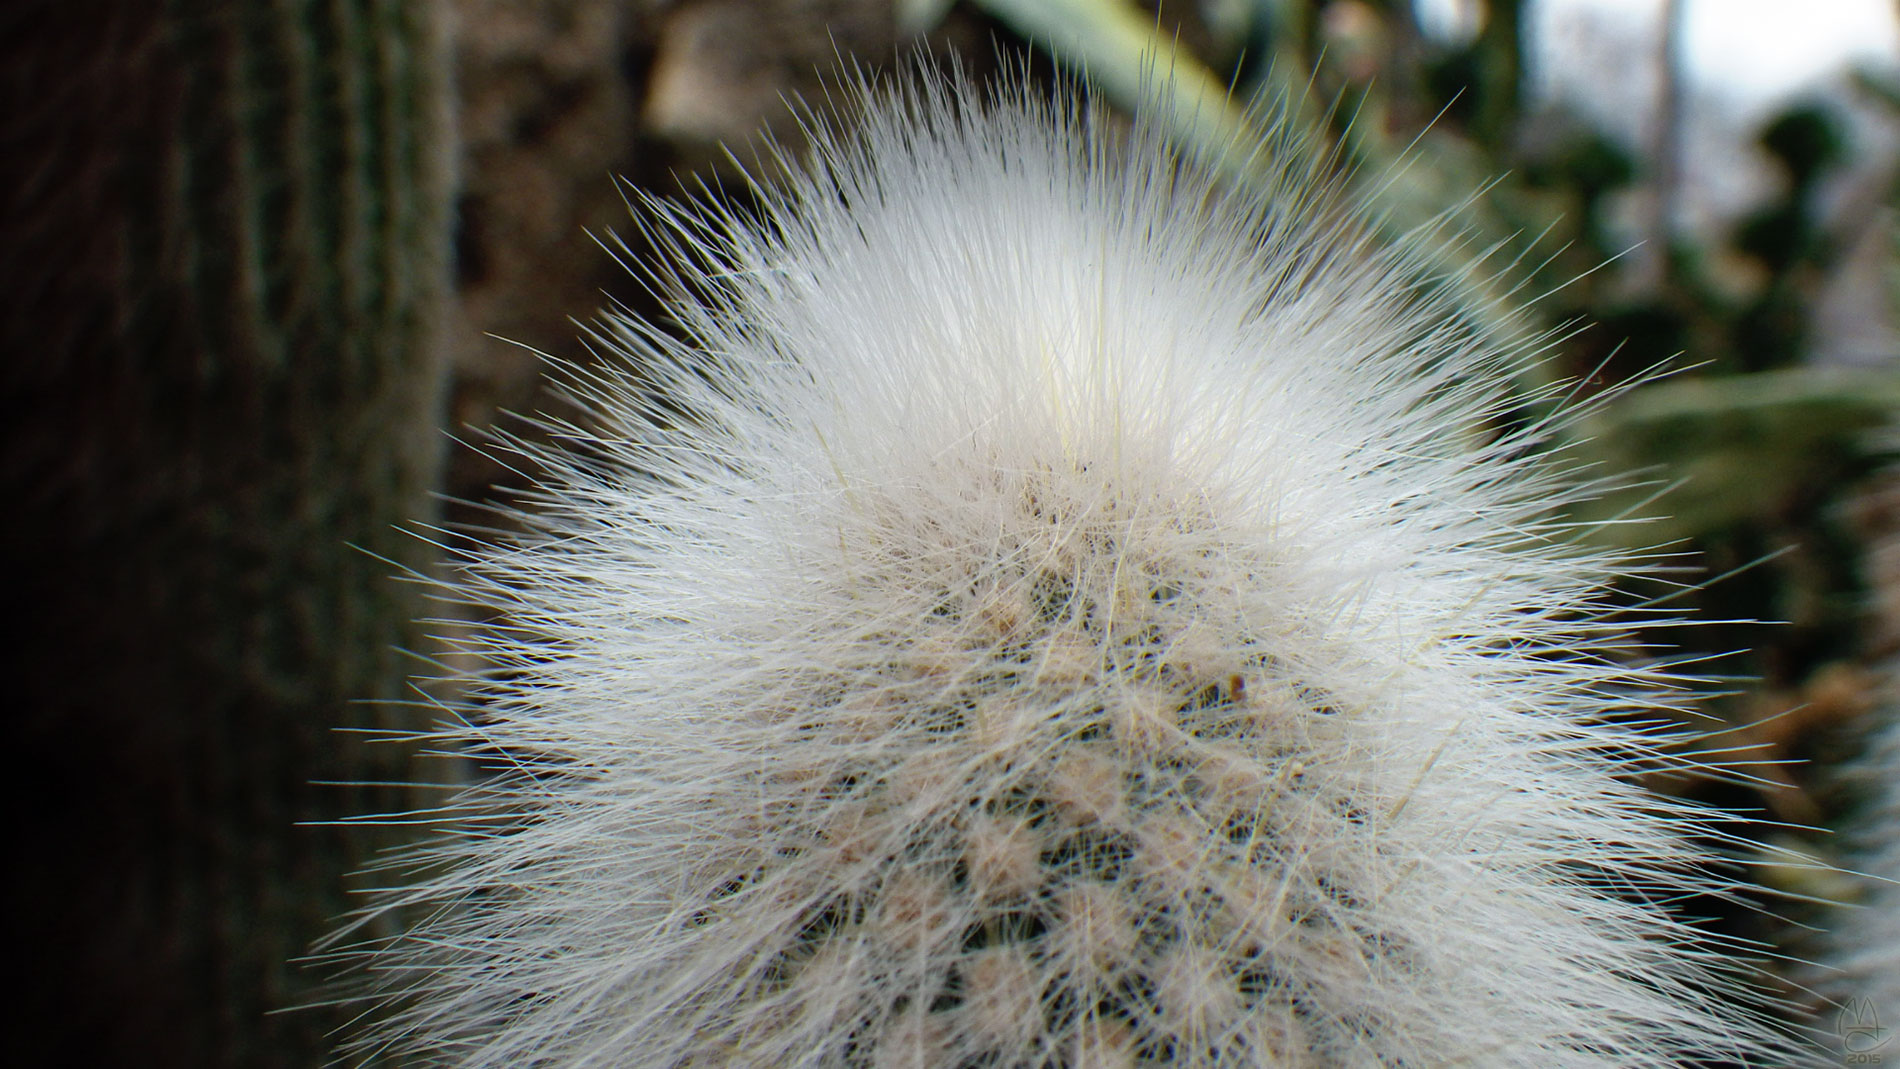 Old Man Cactus, Anna Scripps Whitcomb Conservatory, Belle Isle